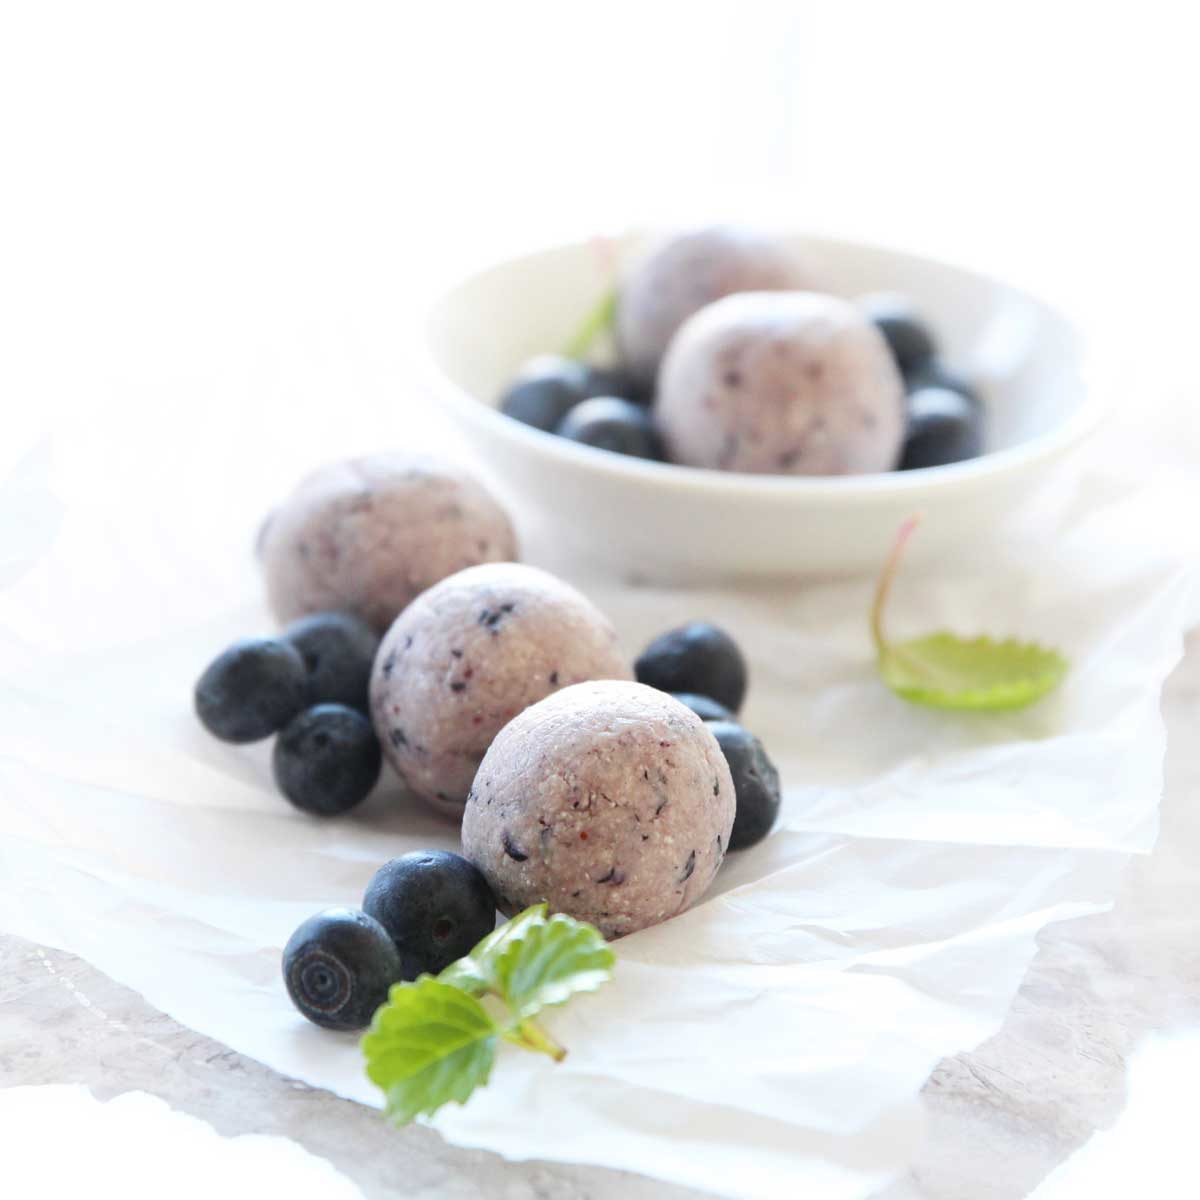 Blueberry Cheesecake Protein Balls Recipe (Healthy Low Carb Energy Bites)